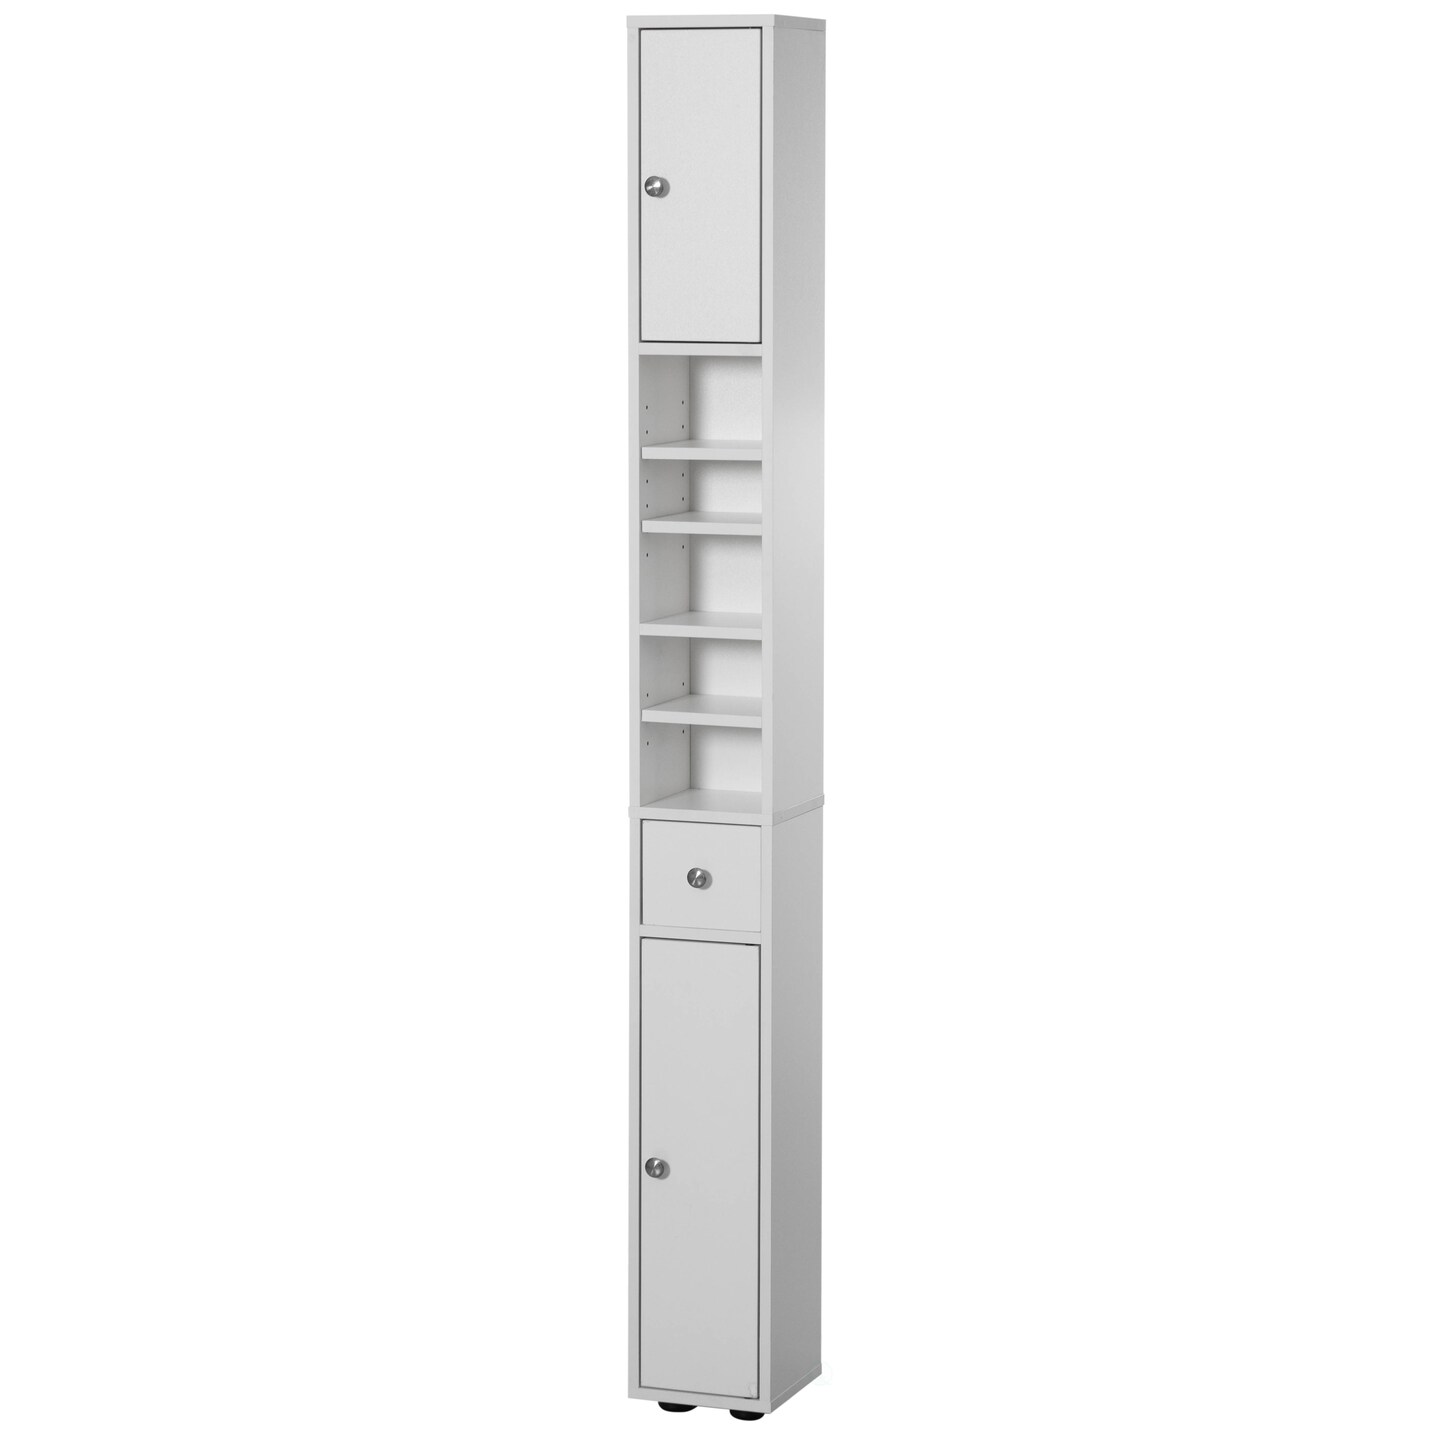 72 Inches Narrow, Tall and Space Saving Multi-Purpose Freestanding White Linen Tower - Ideal as Bathroom Organizer, Toilet Paper Cabinet and Kitchen Cabinet